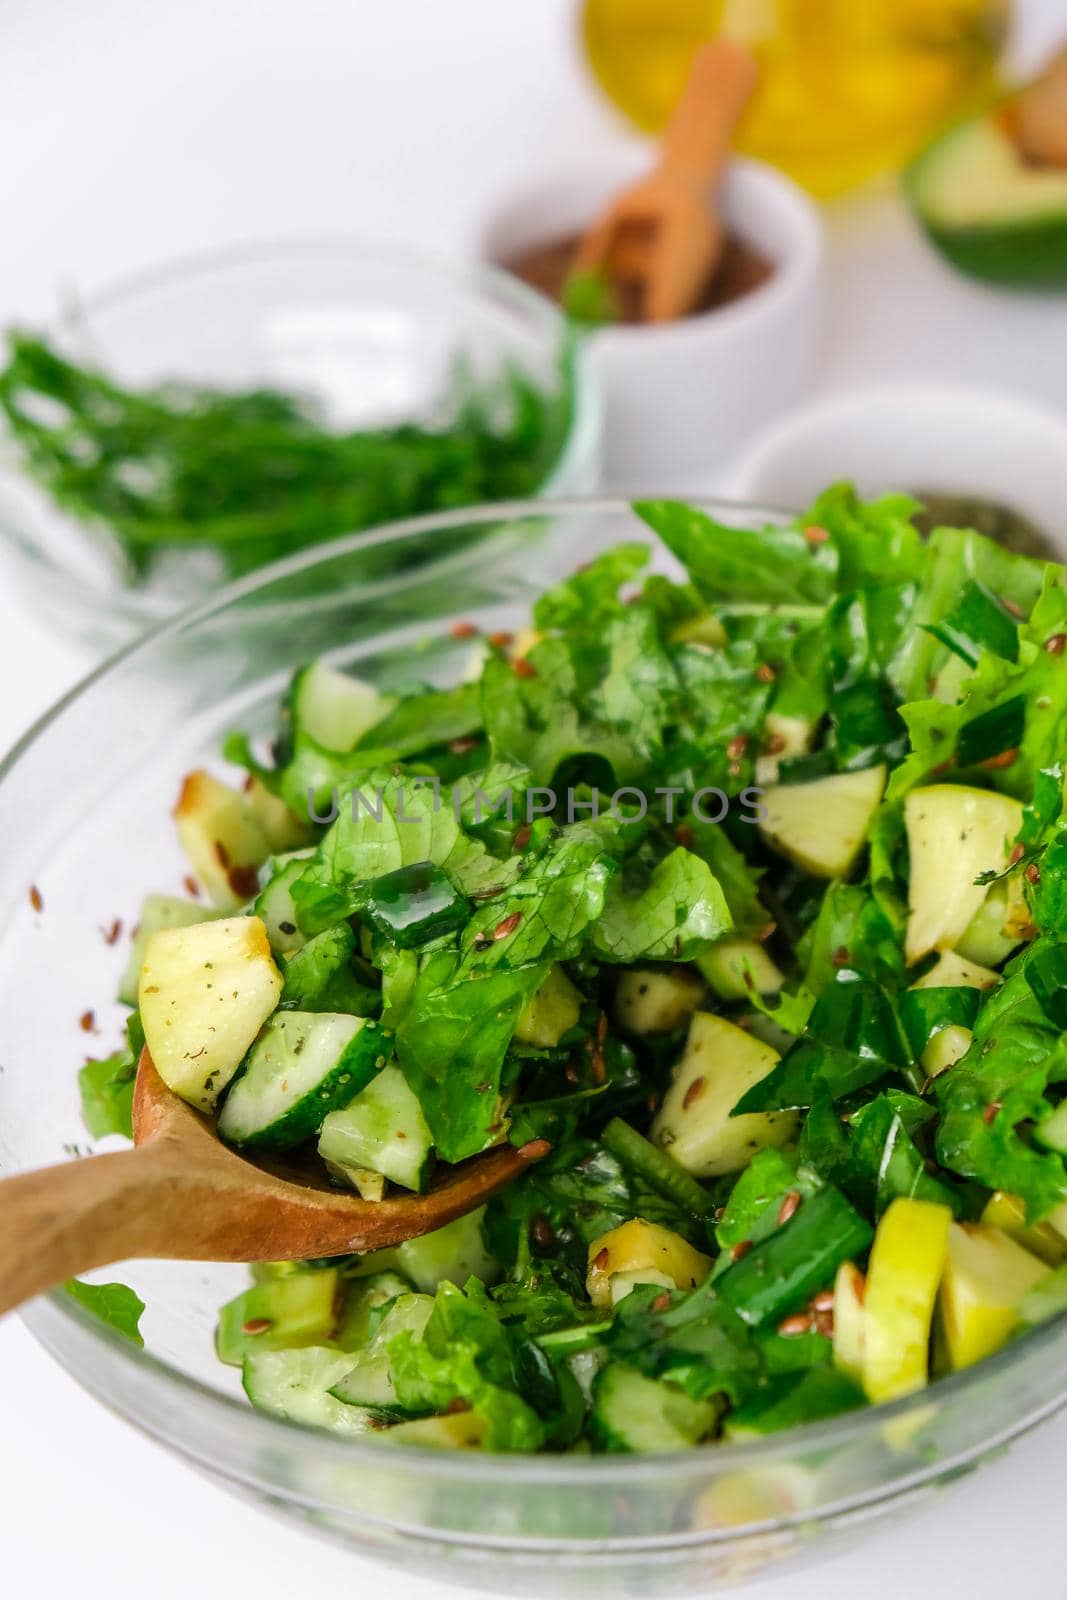 Salad of fresh green vegetables and herbs. Cooking healthy diet or vegetarian food. Step by step recipe. Healthy eating. Ingredients for salad. Raw food concept. A variety of organic fruits and vegetables with avocado. Vegan menu. Fresh spinach and green onion leaves, arugula. Flax seeds